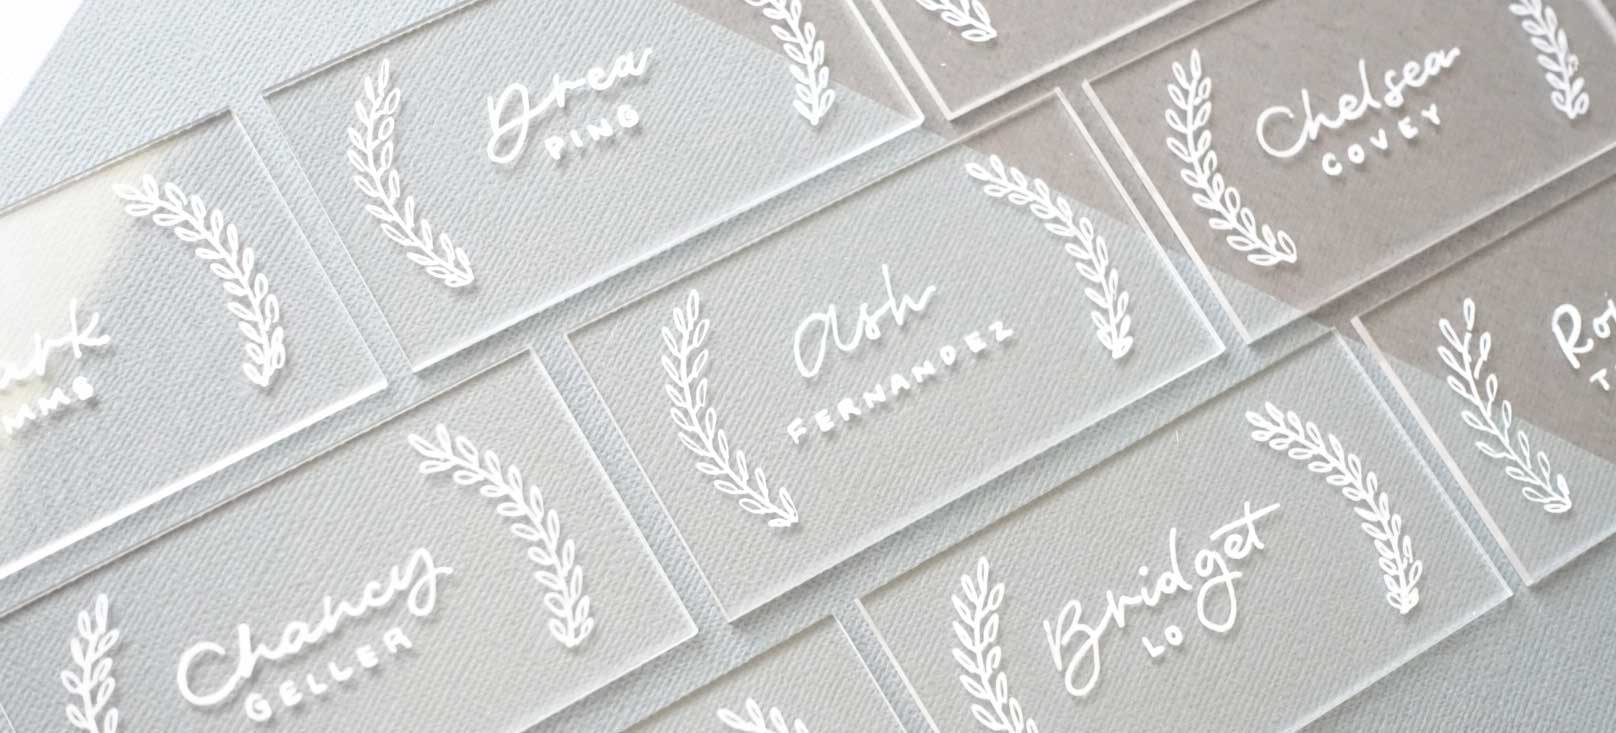 Acrylic rectangle place card with calligraphy and wreath